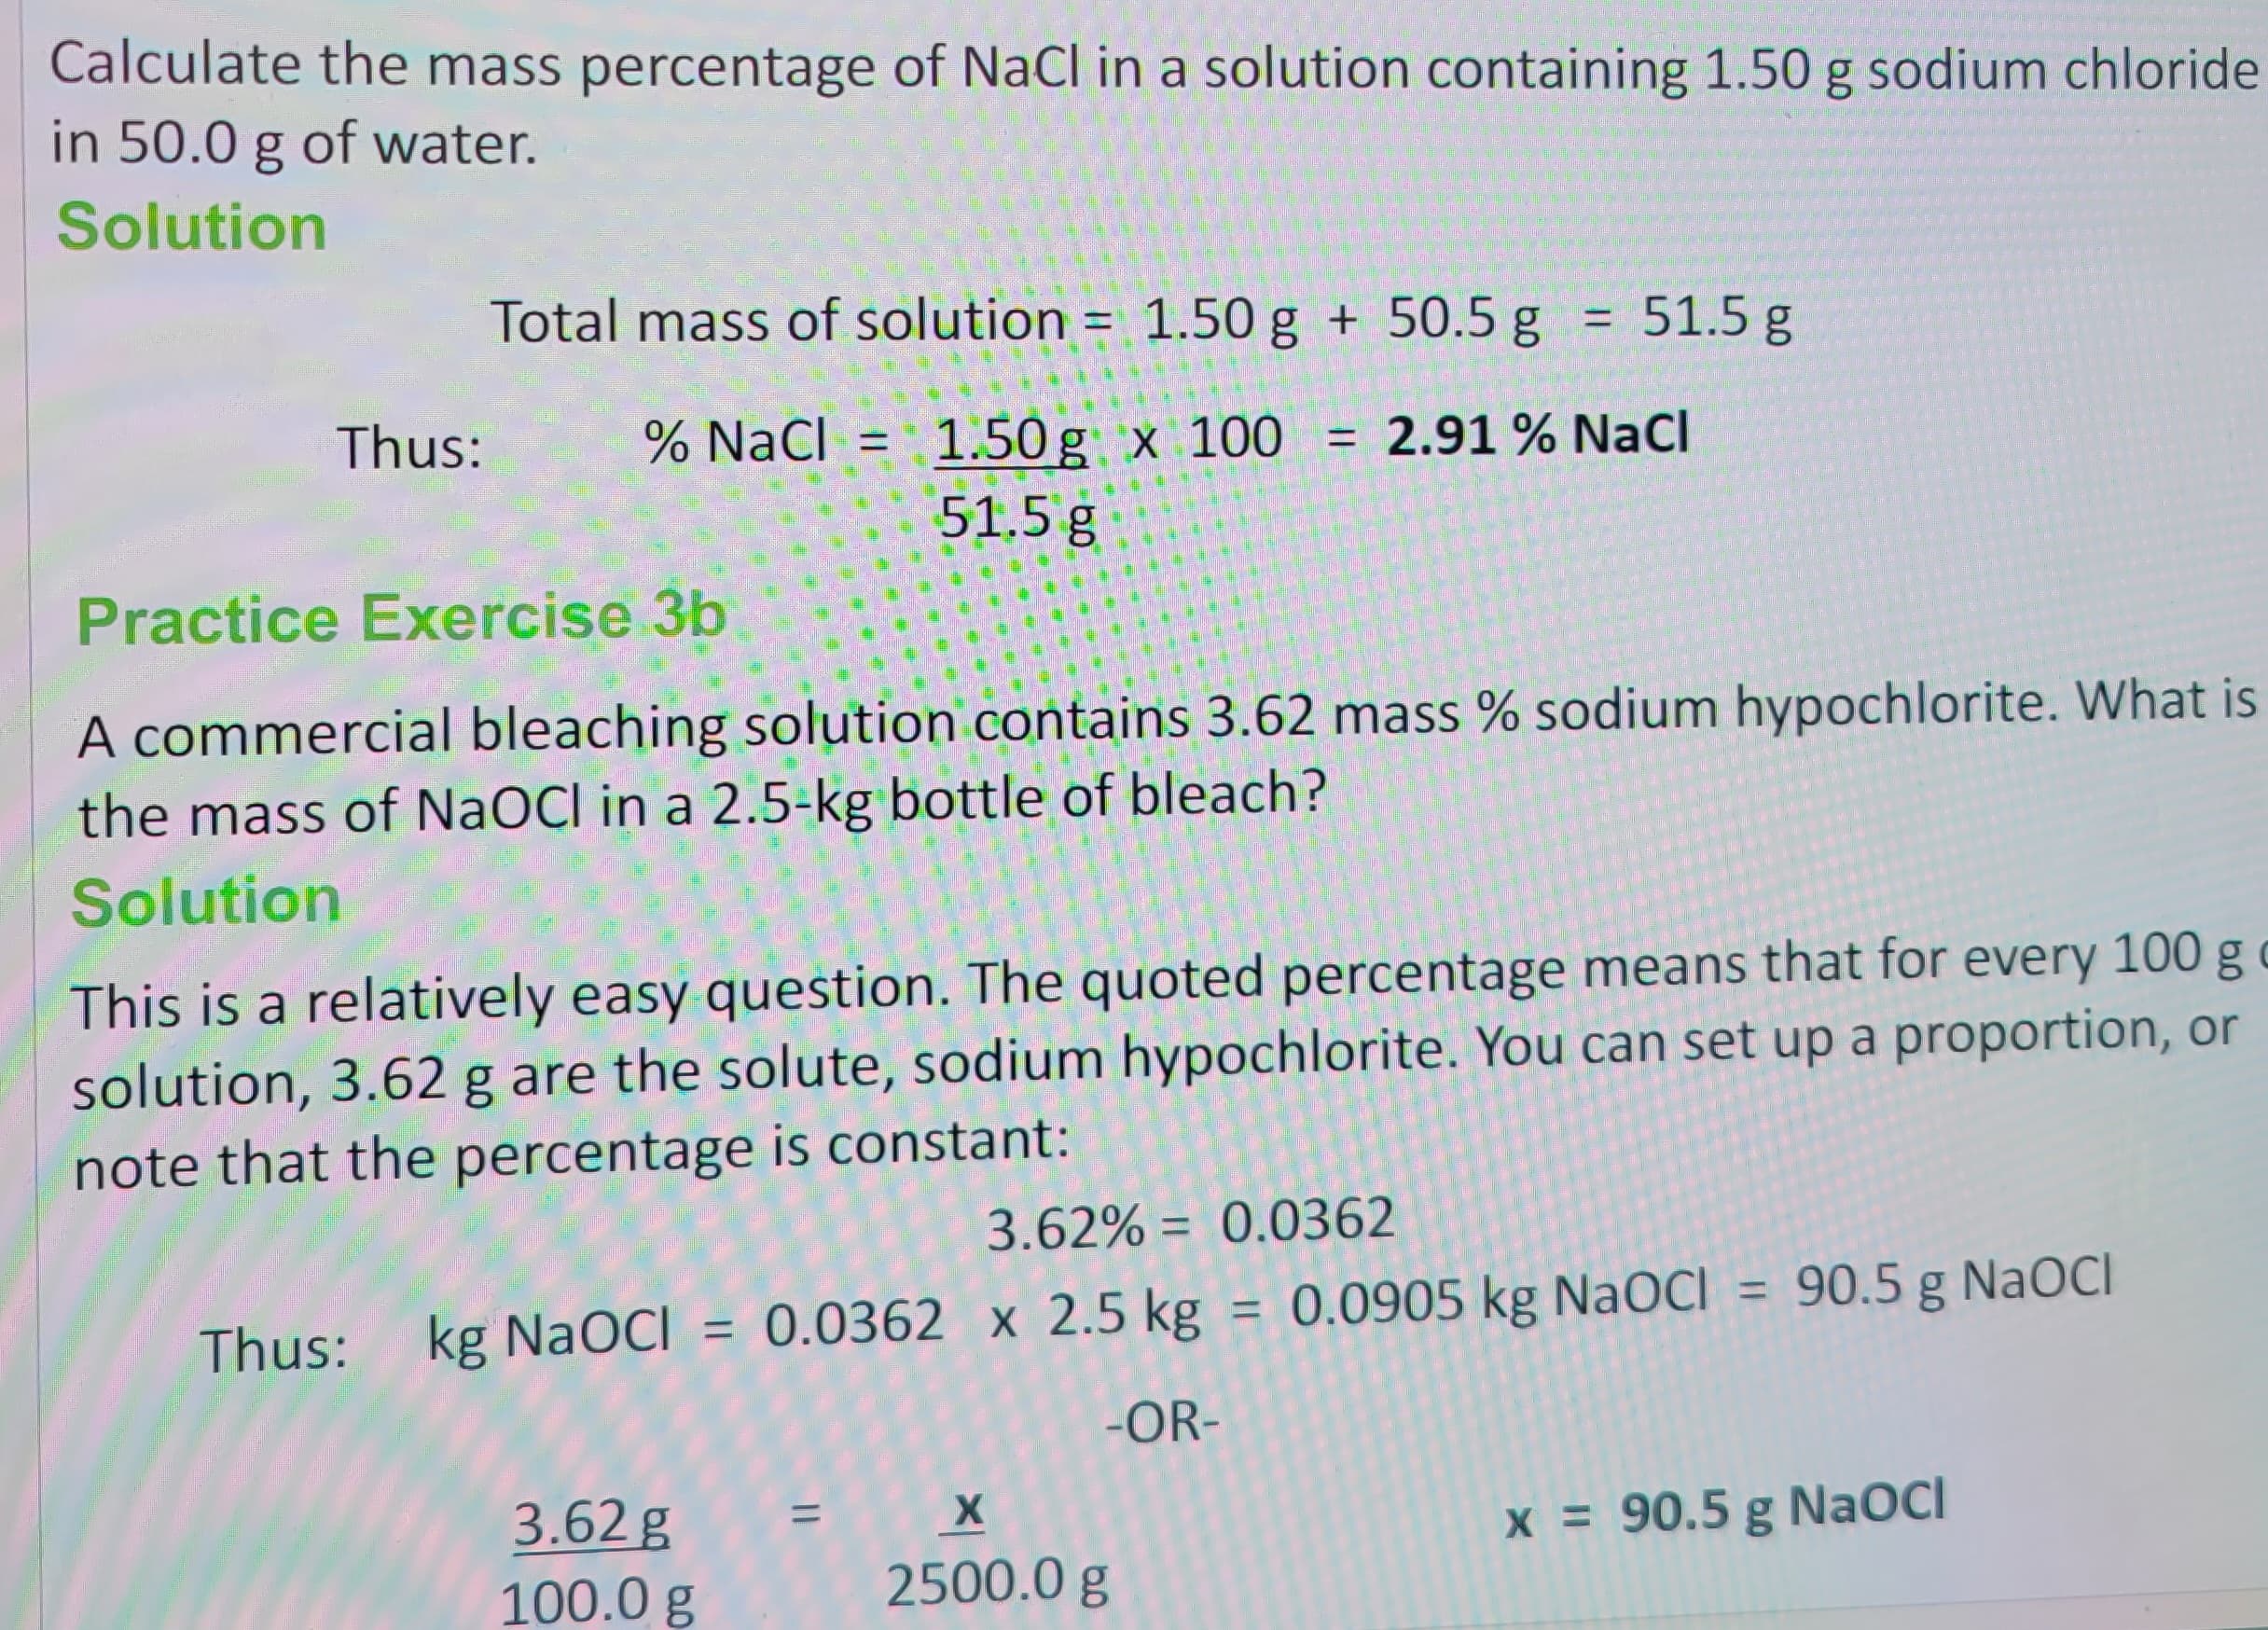 Calculate the mass percentage of NaCl in a solution containing 1.50 g sodium chloride
in 50.0 g of water.
Solution
Thus:
Total mass of solution = 1.50 g + 50.5 g = 51.5 g
% NaCl = 1.50g x 100 = 2.91 % NaCl
51.5 g
Practice Exercise 3b
A commercial bleaching solution contains 3.62 mass % sodium hypochlorite. What is
the mass of NaOCI in a 2.5-kg bottle of bleach?
Solution
This is a relatively easy question. The quoted percentage means that for every 100 g c
solution, 3.62 g are the solute, sodium hypochlorite. You can set up a proportion, or
note that the percentage is constant:
3.62% = 0.0362
Thus: kg NaOCI = 0.0362 x 2.5 kg = 0.0905 kg NaOCI = 90.5 g NaOCI
-OR-
3.62 g
100.0 g
X
2500.0 g
x = 90.5 g NaOCI